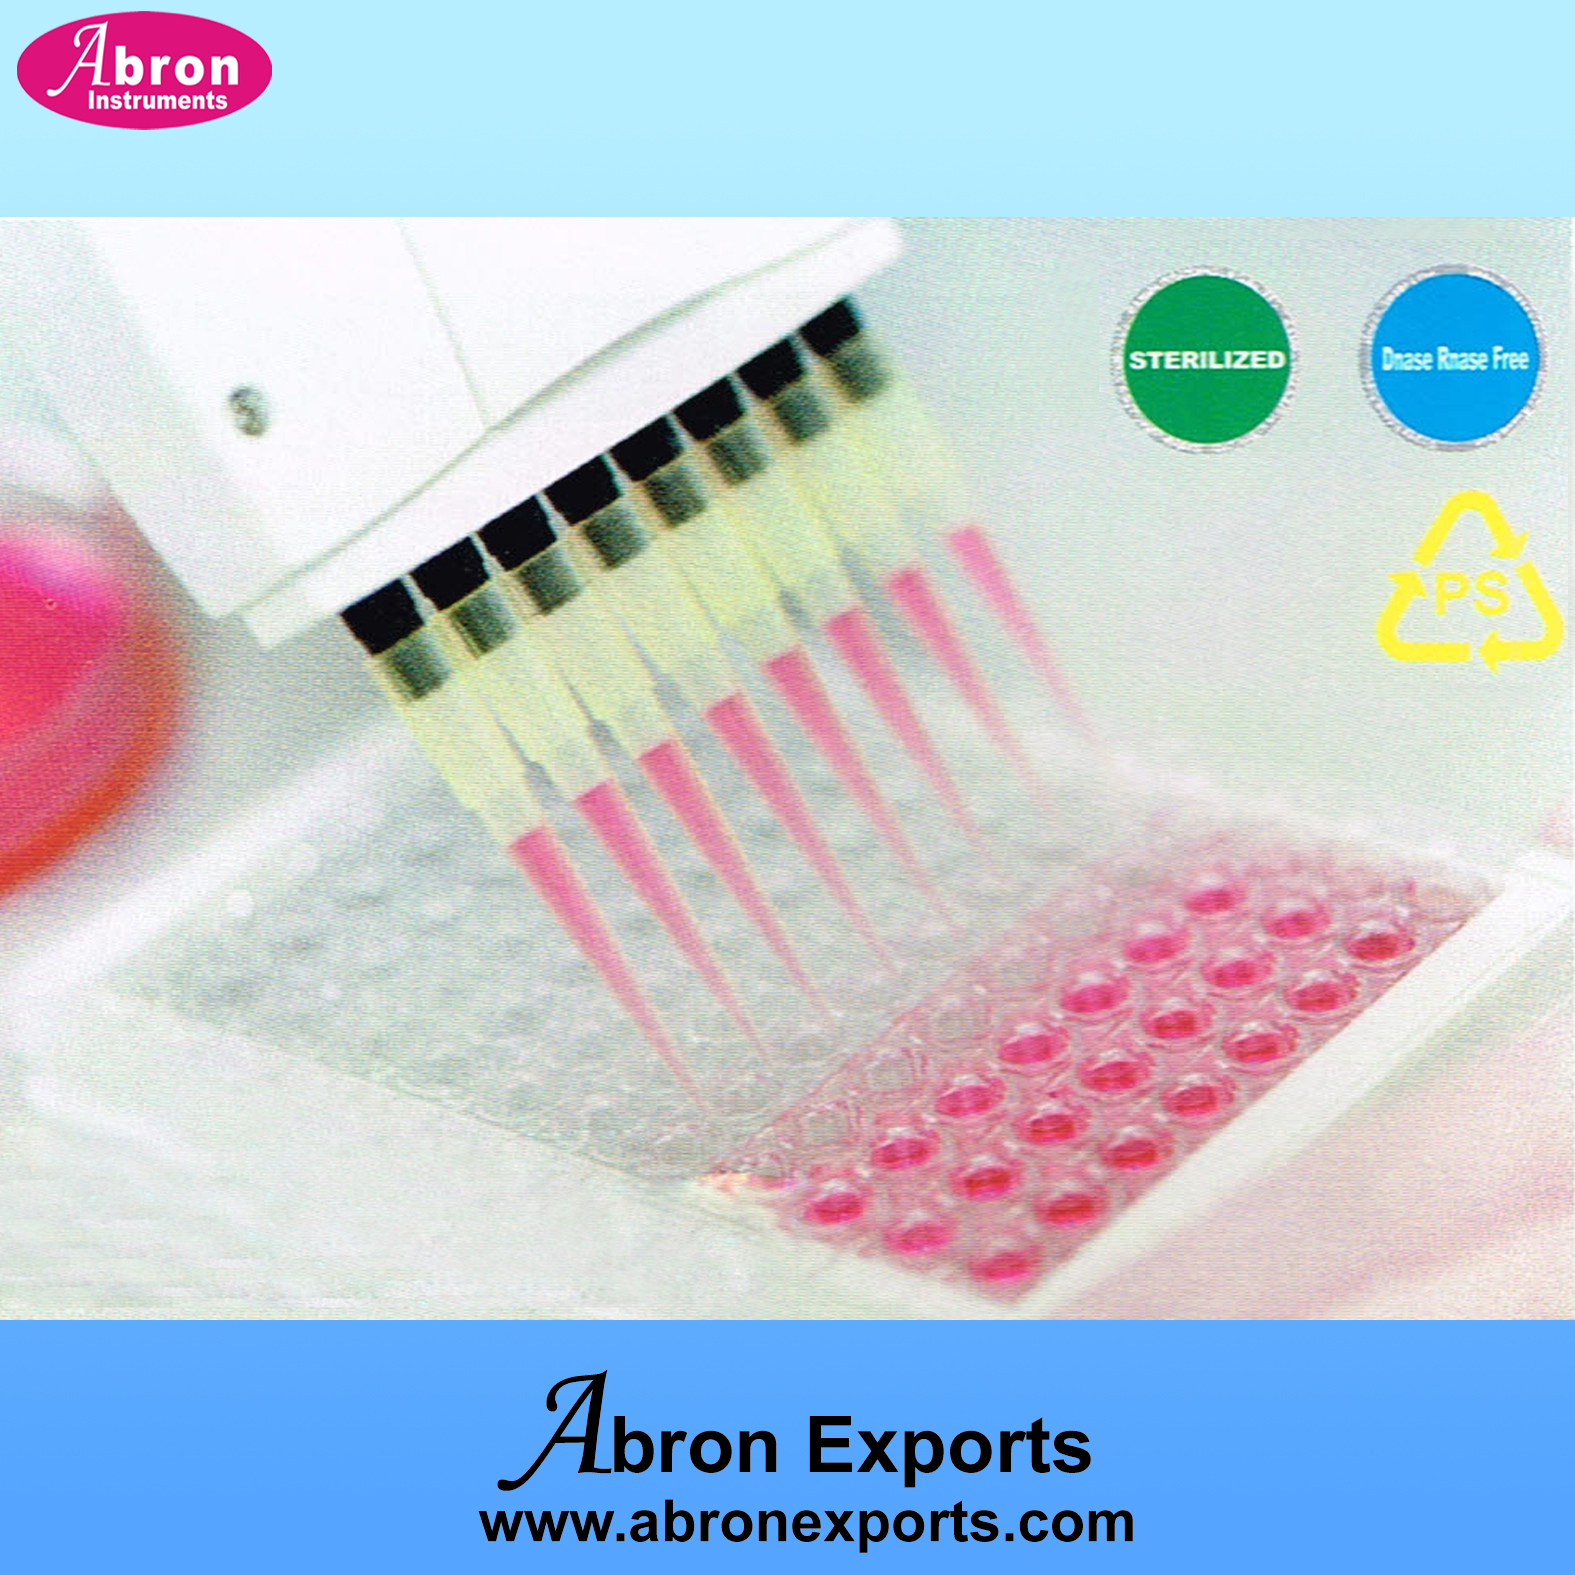 Elisa plates with 96 wells sterile disposable Pack of 100 single individually packed Abron ABM-2760E 